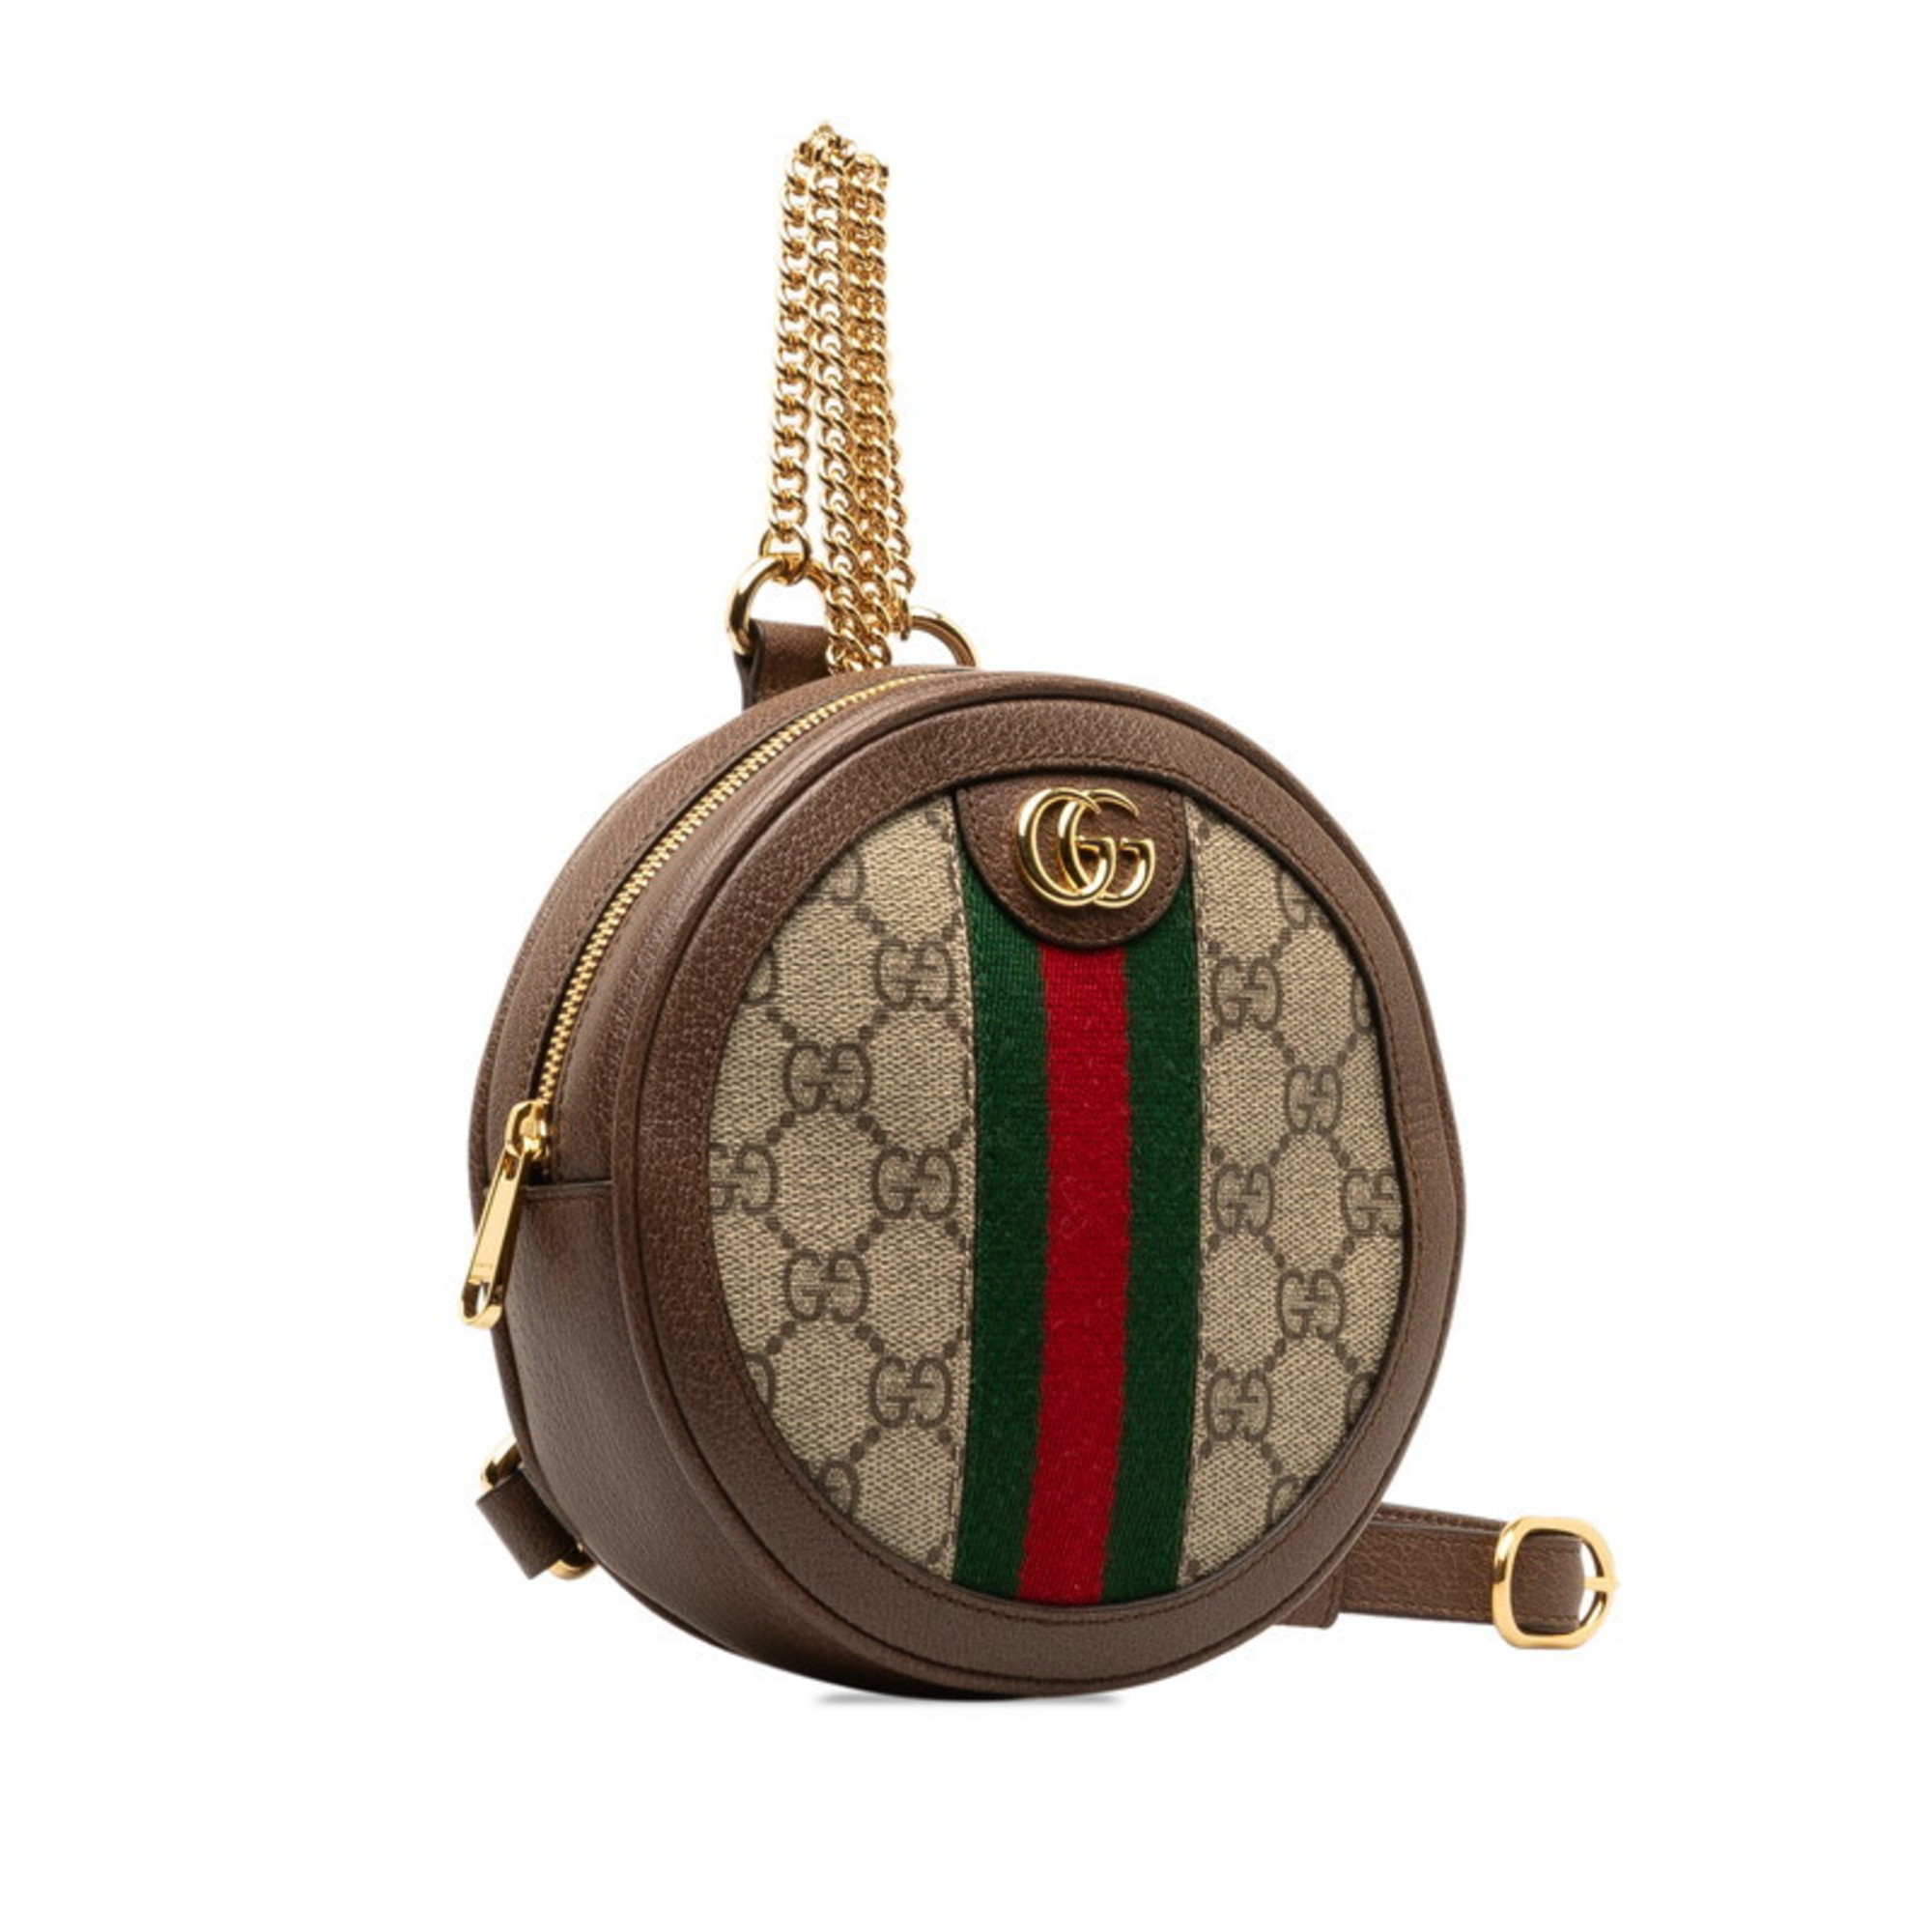 Gucci GG Supreme Marmont Ophidia Round Backpack 598661 Beige Brown PVC Leather Women's GUCCI